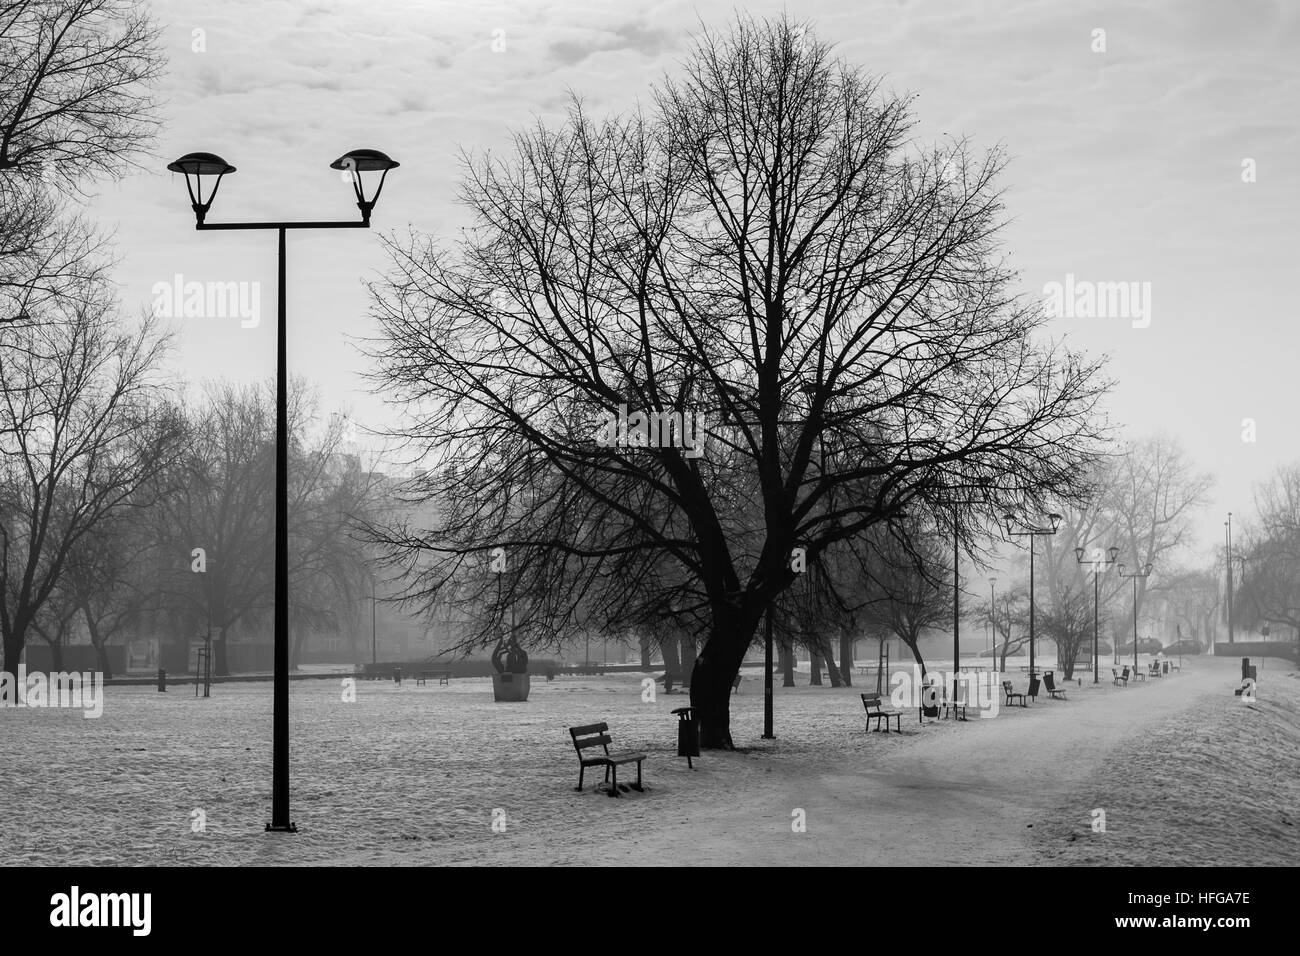 The Planty in Krakow during a cold day. Stock Photo